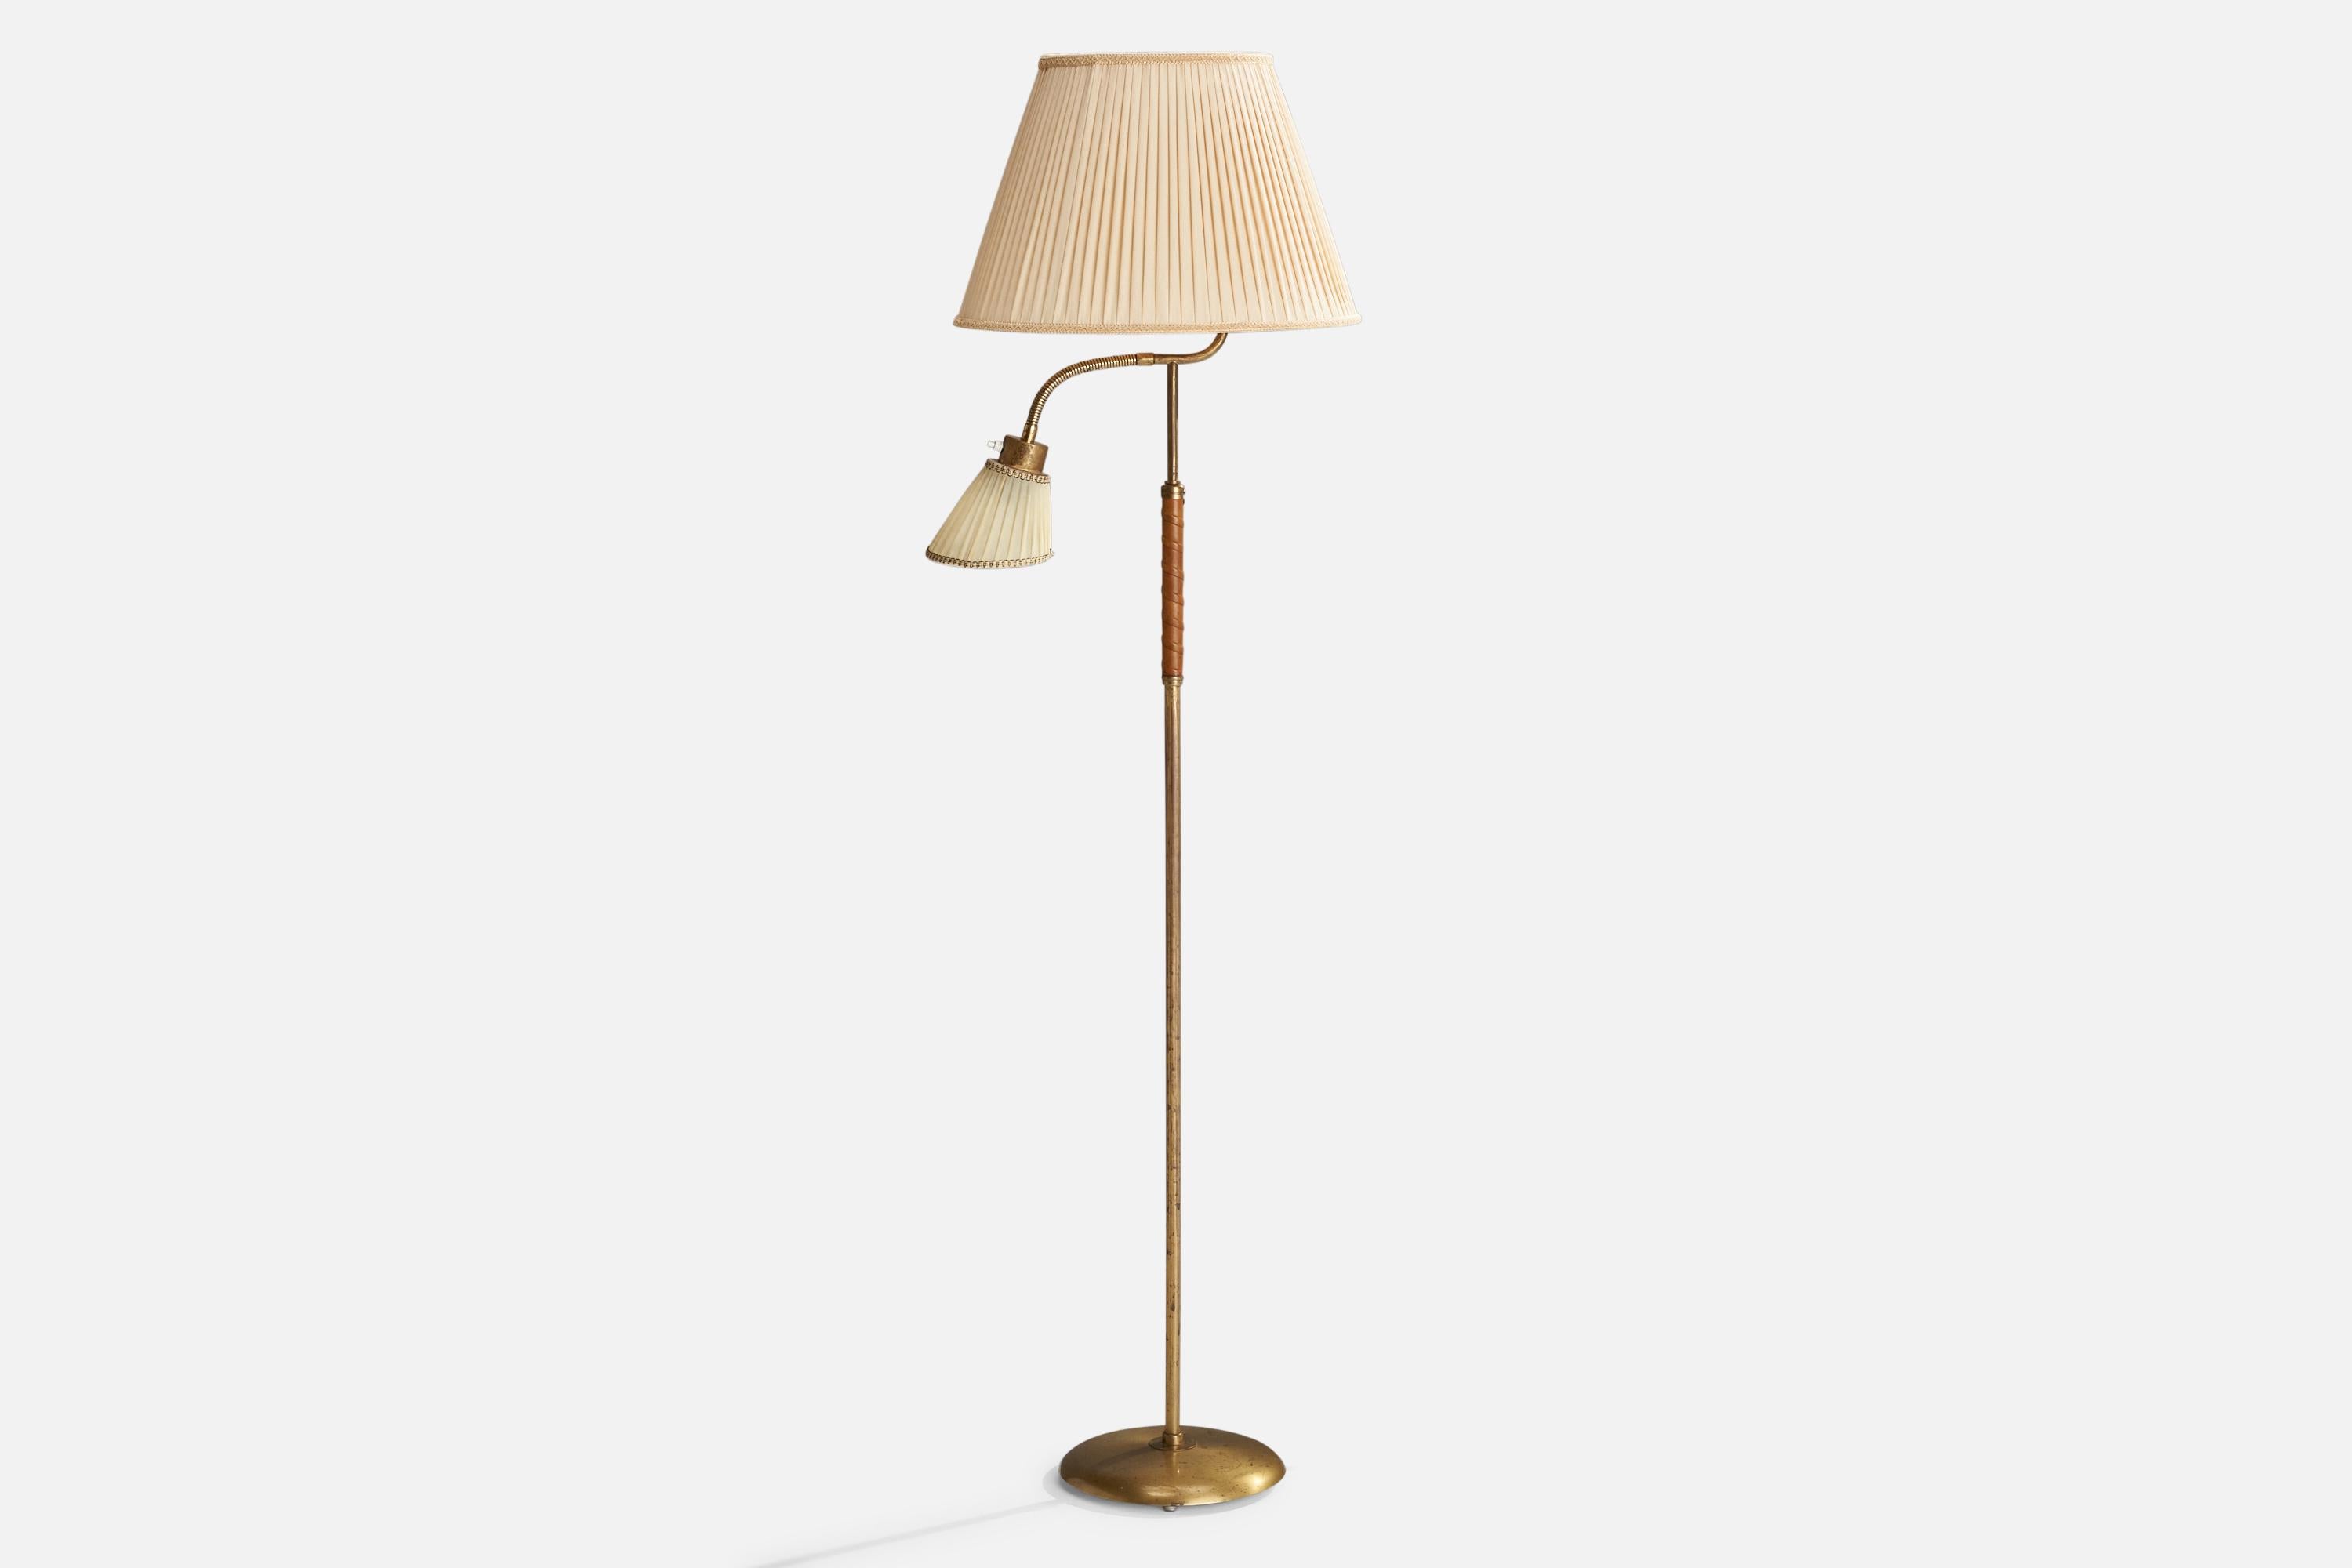 A two-armed brass, fabric and brown leather floor lamp designed by Bertil Brisborg and produced by Nordiska Kompaniet, Sweden, 1950s.

Overall Dimensions (inches): 66.5” H x 18” W x 19” D
Stated dimensions include shade.
Bulb Specifications: E-26